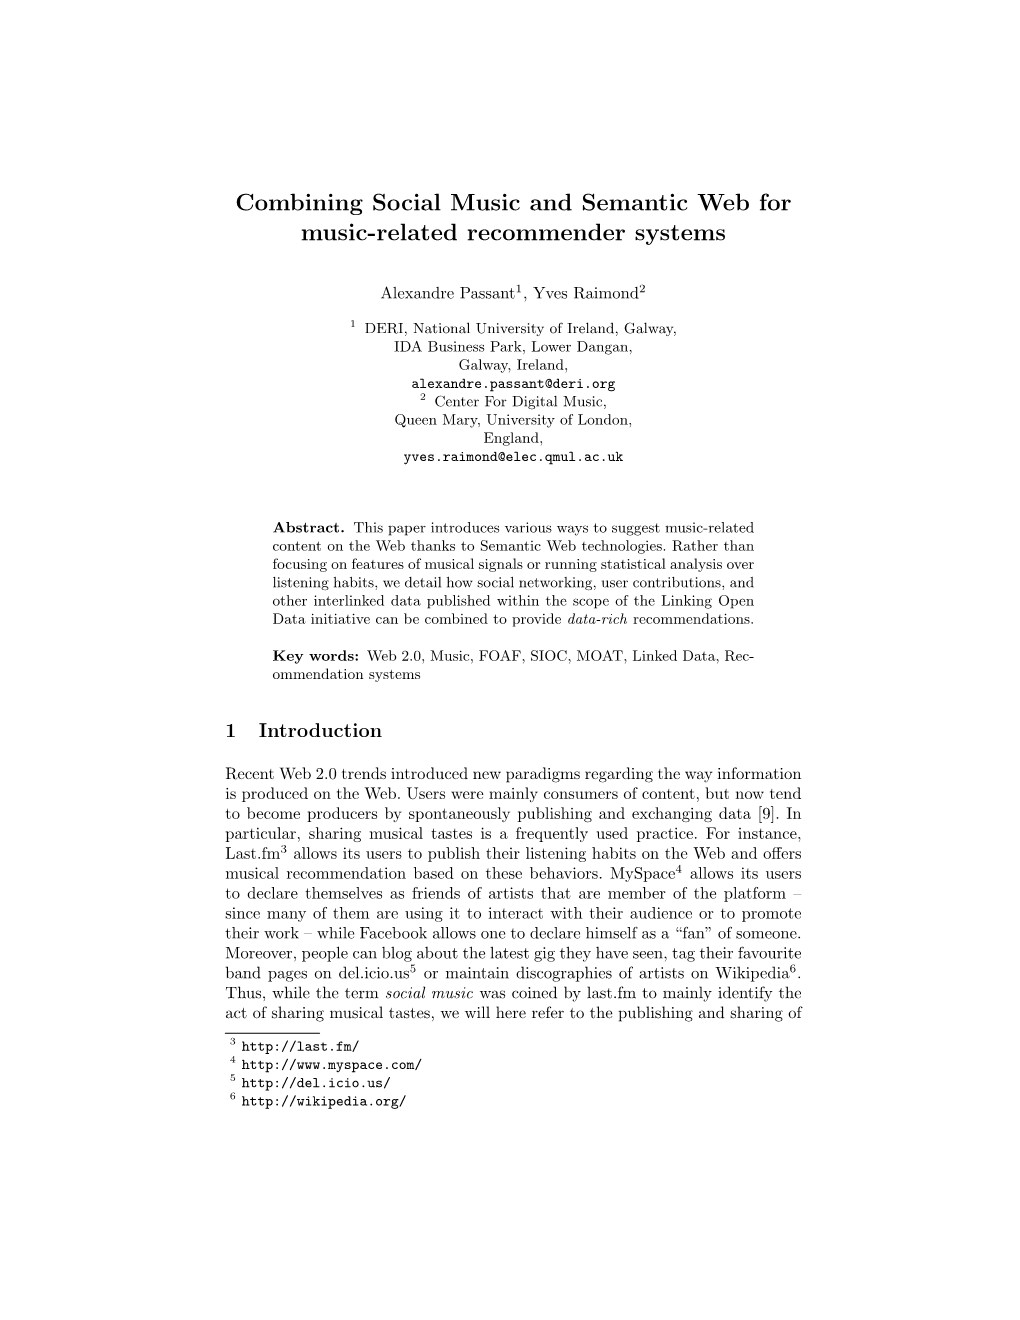 Combining Social Music and Semantic Web for Music-Related Recommender Systems